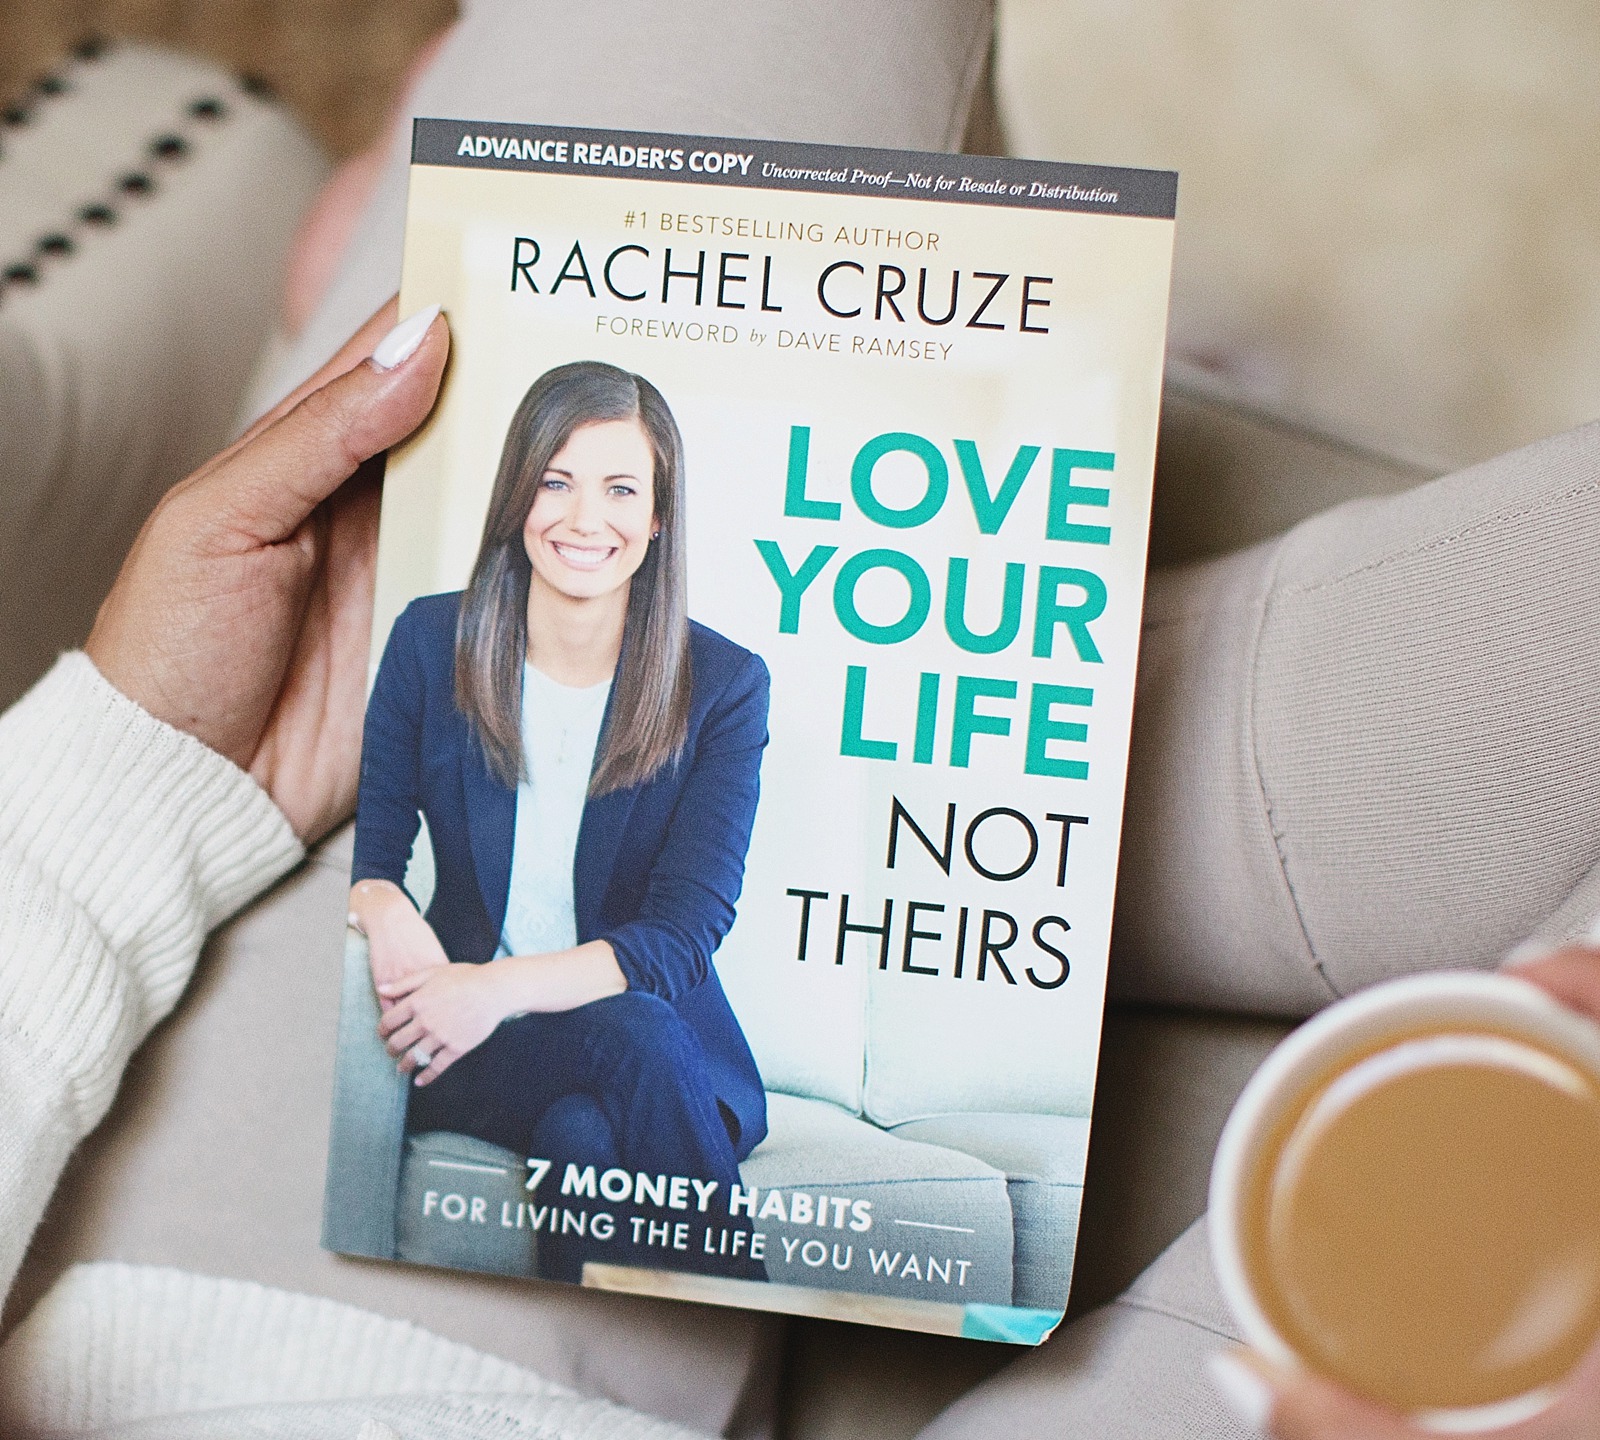 money-saving-dave-ramsey-rachel-cruze-love-your-life-not-theirs-book-review-9259